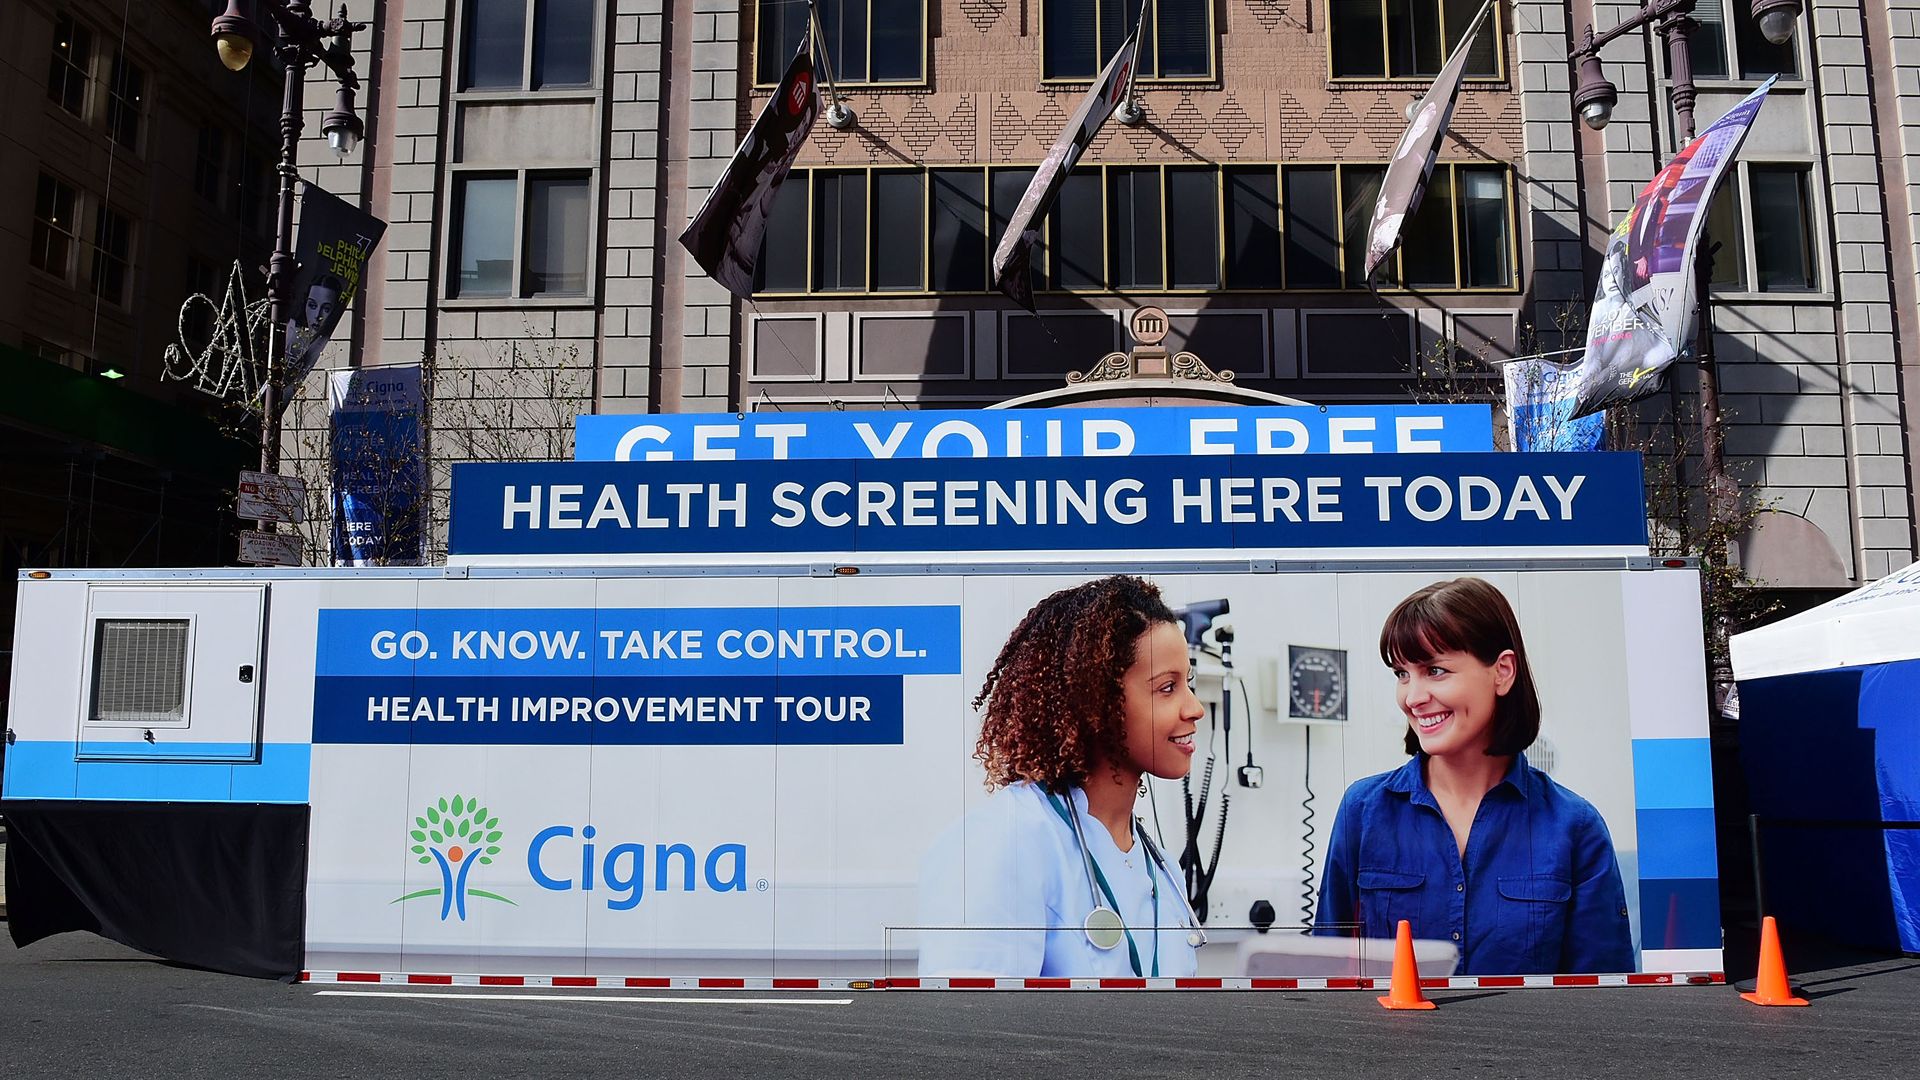 A mobile van sponsored by Cigna promotes free health screenings.